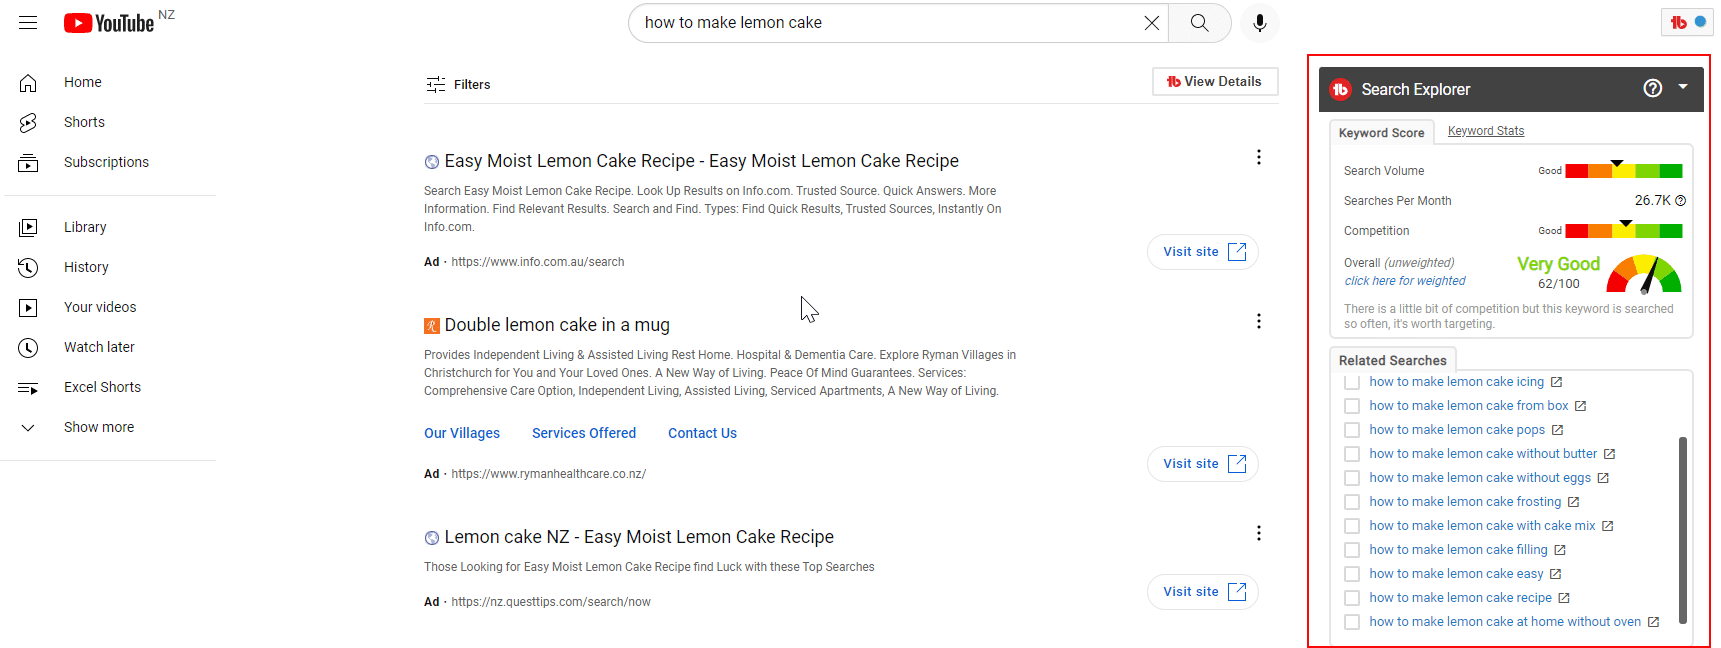 Searching keywords in the YouTube search bar with TubeBuddy results on the righthand side